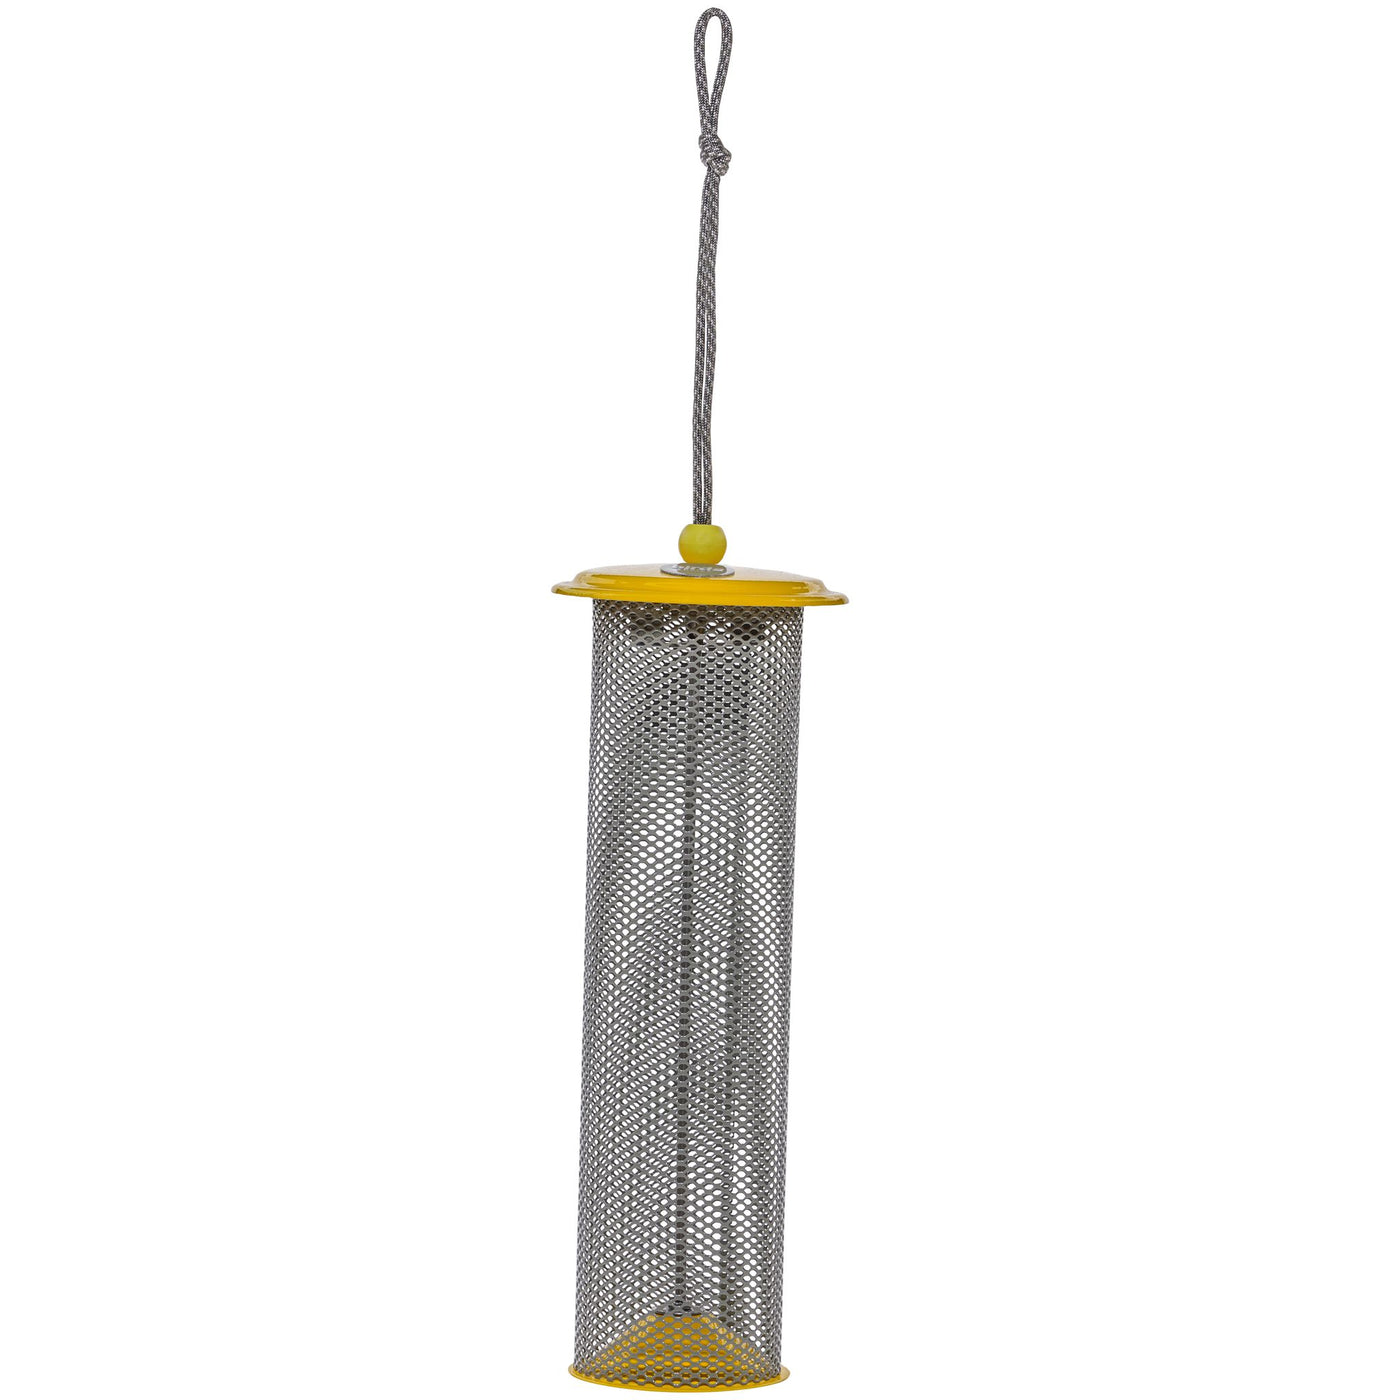 Magnet Mesh Tube Feeder Color Pop Collection for Finches in Yellow and Gray - Birds Choice